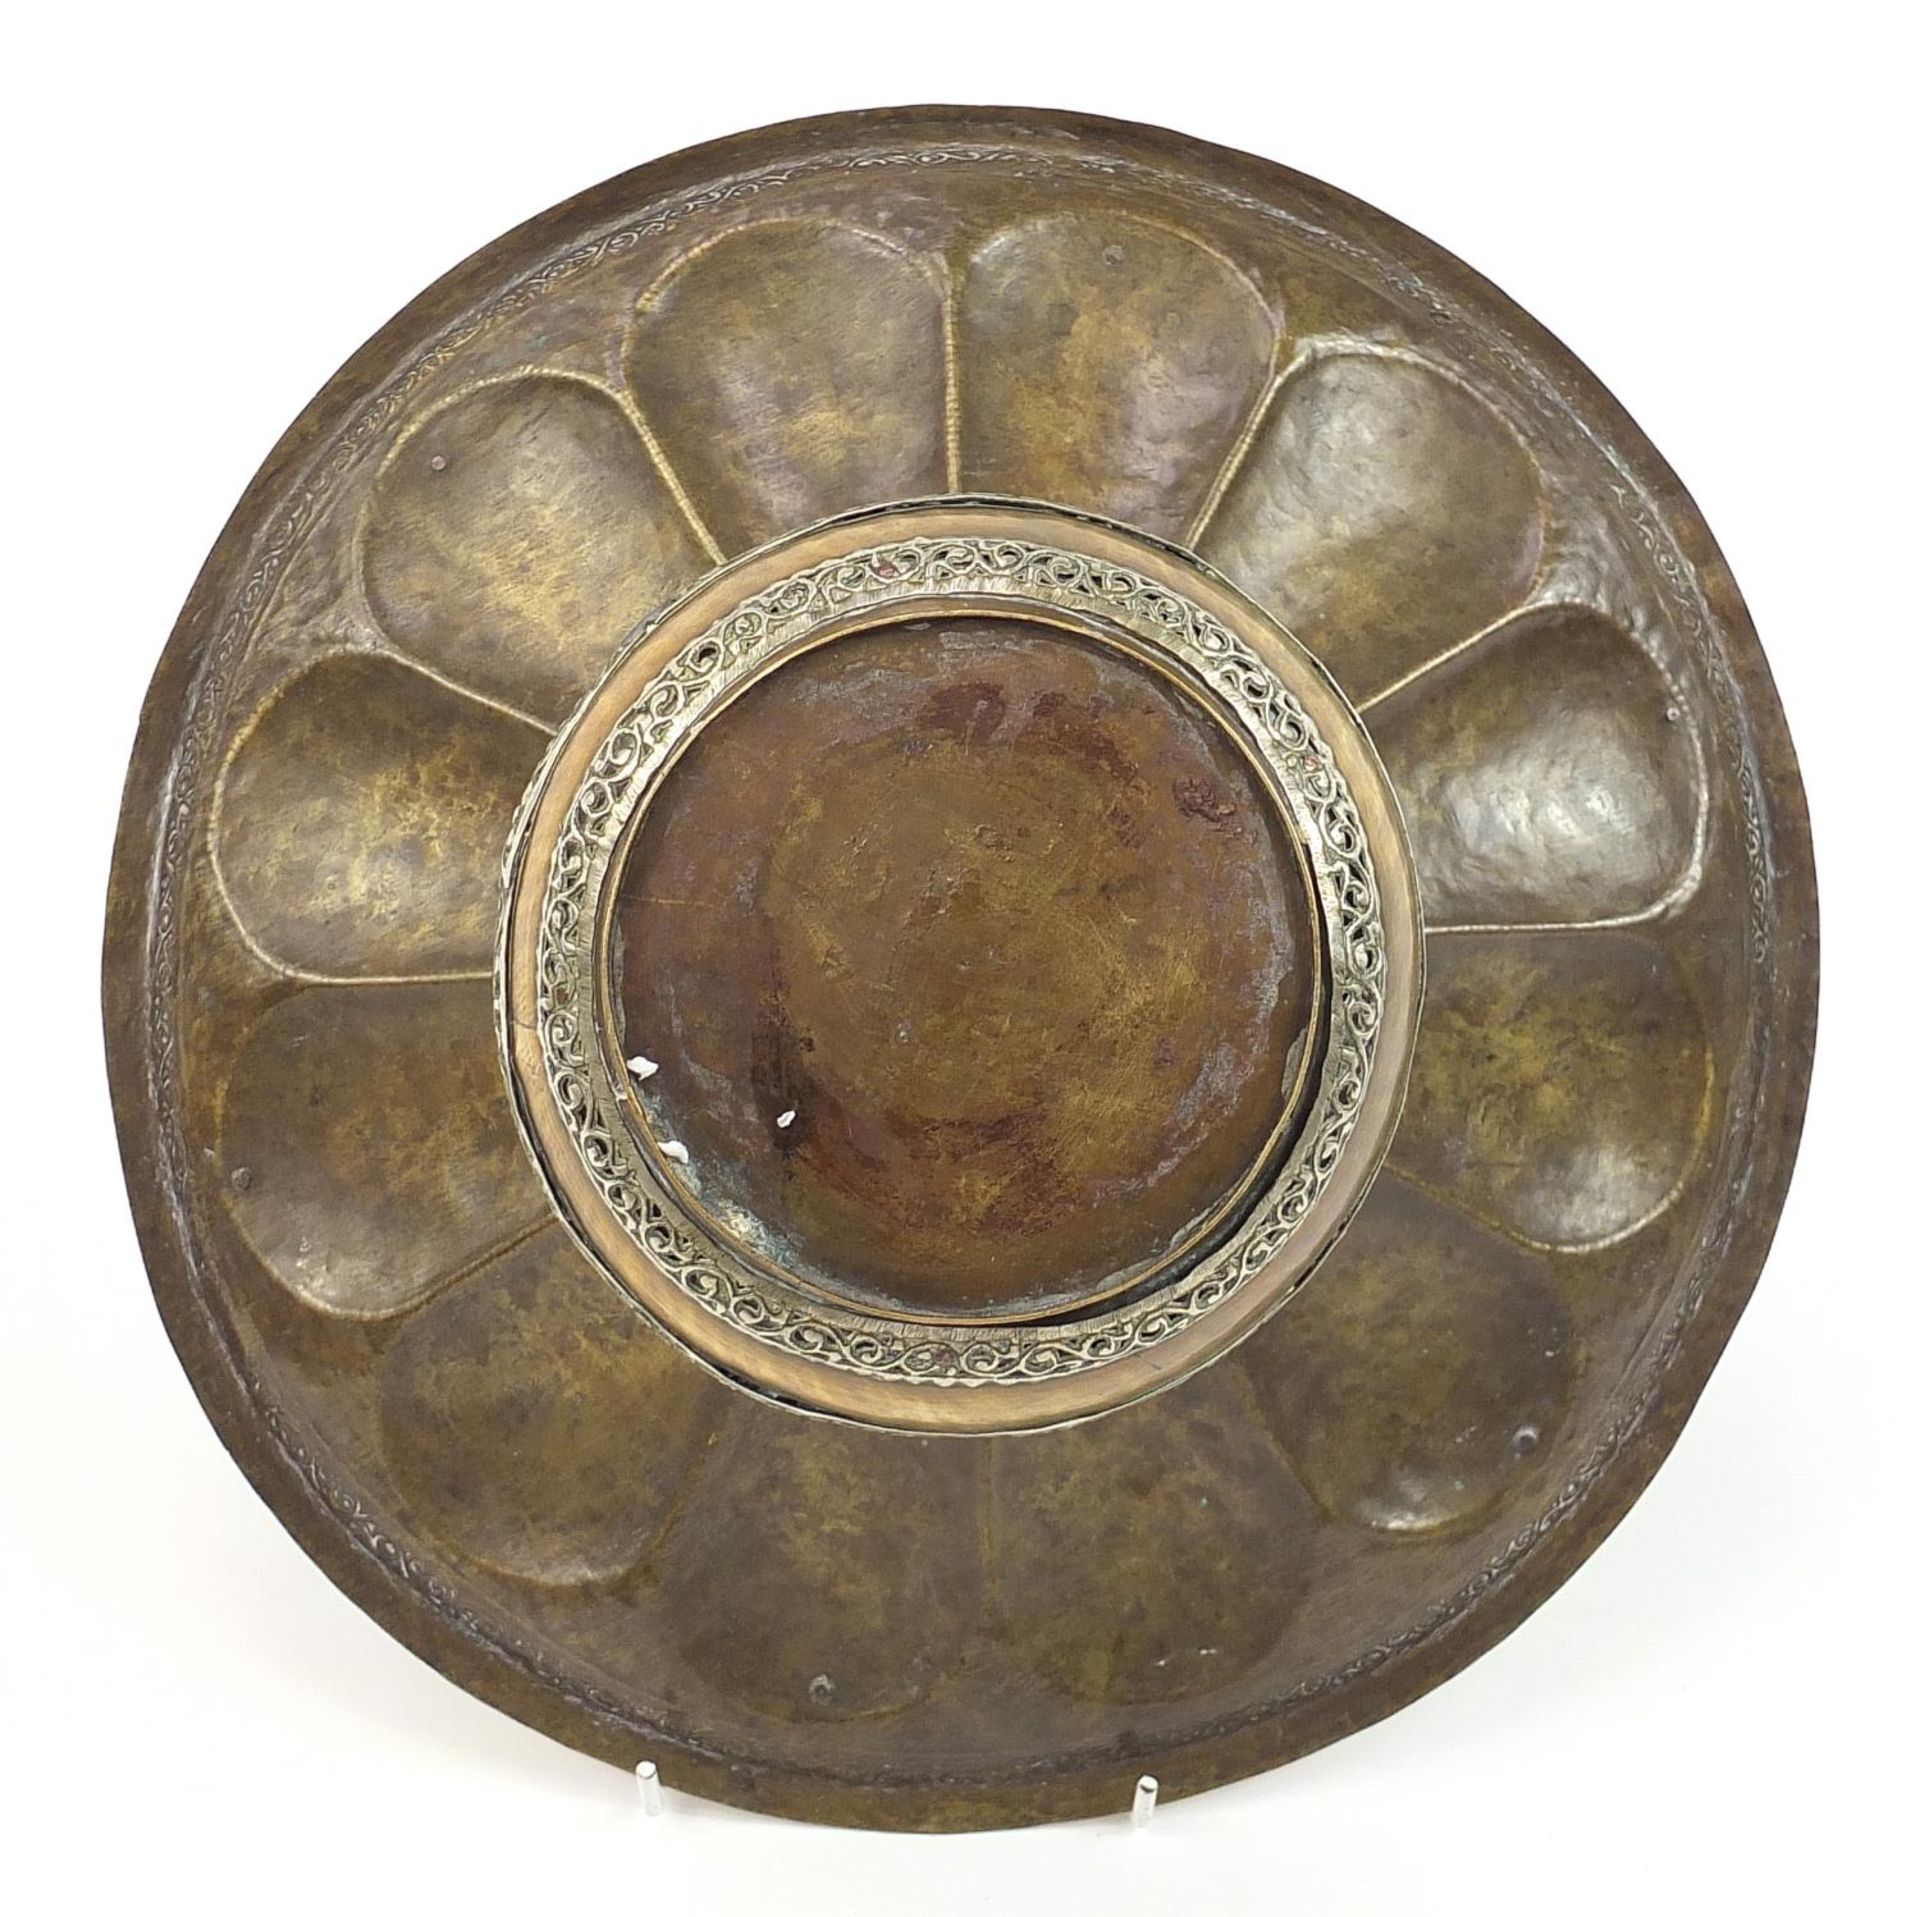 Islamic bronze incense burner with silver overlay and pierced lid, 31cm in diameter - Image 4 of 4